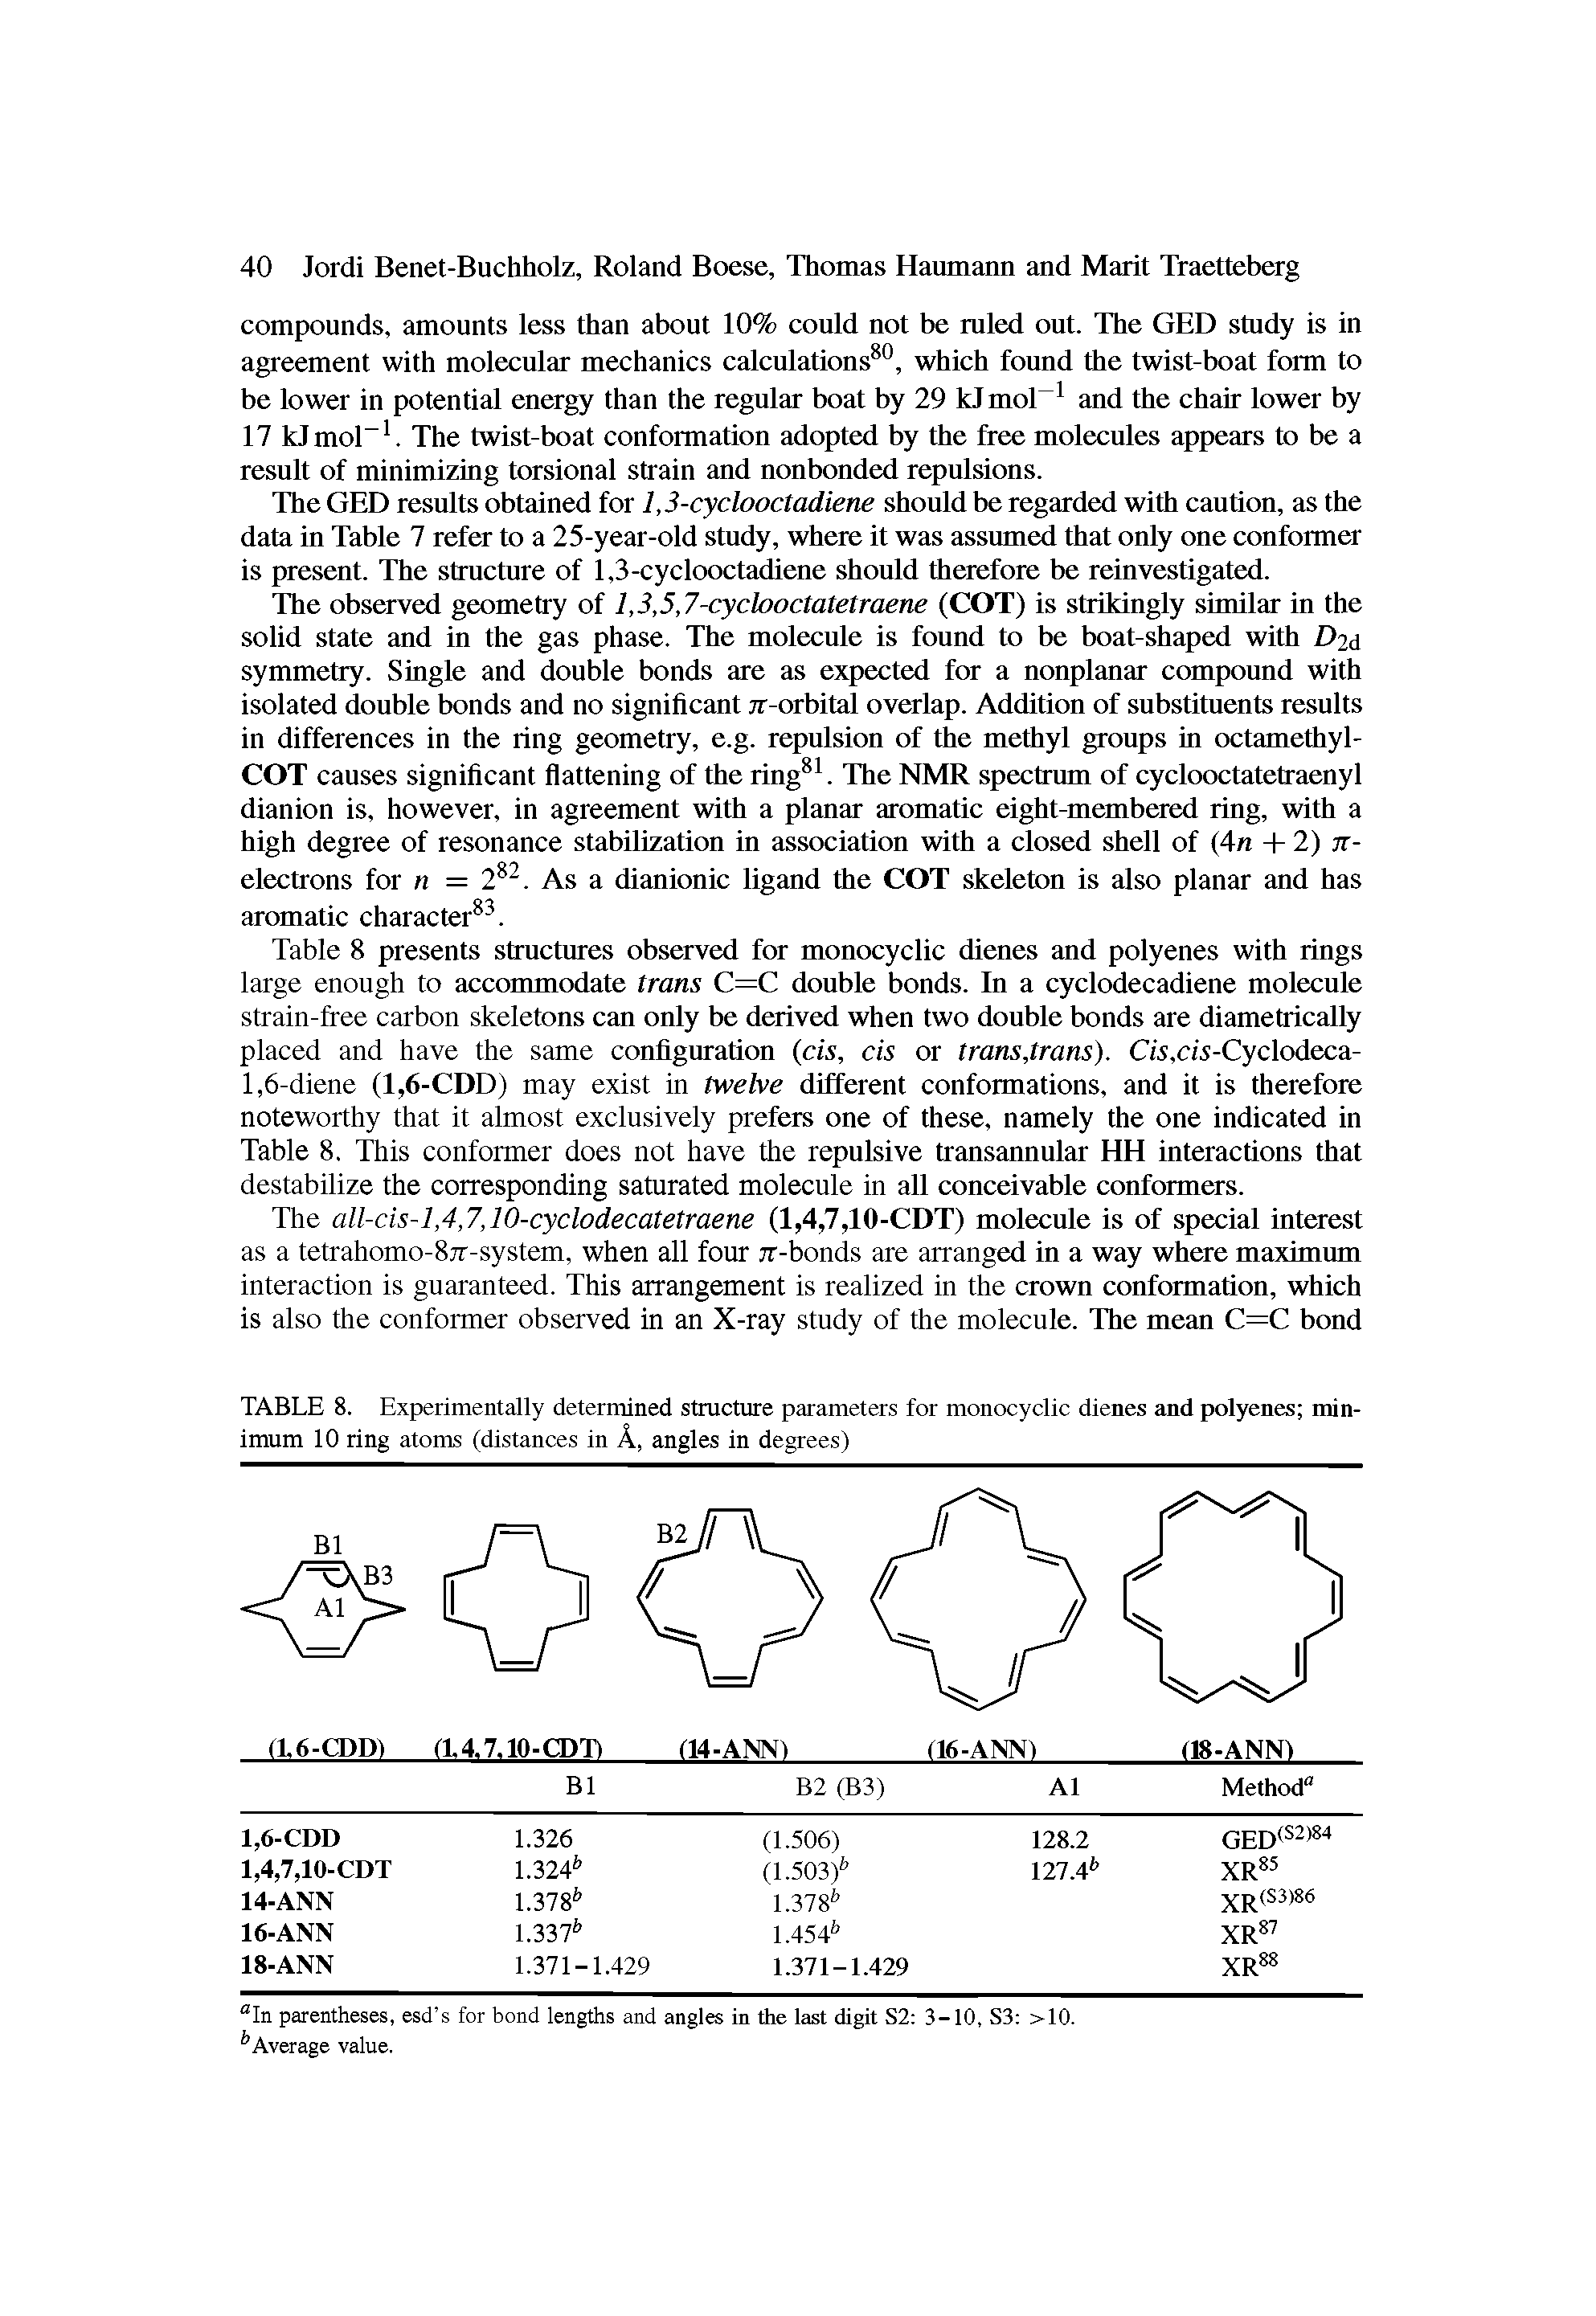 Table 8 presents structures observed for monocyclic dienes and polyenes with rings large enough to accommodate trans C=C double bonds. In a cyclodecadiene molecule strain-free carbon skeletons can only be derived when two double bonds are diametrically placed and have the same configuration (as, cis or trans,trans). Cw,cis-Cyclodeca-1,6-diene (1,6-CDD) may exist in twelve different conformations, and it is therefore noteworthy that it almost exclusively prefers one of these, namely the one indicated in Table 8. This conformer does not have the repulsive transannular HH interactions that destabilize the corresponding saturated molecule in all conceivable conformers.